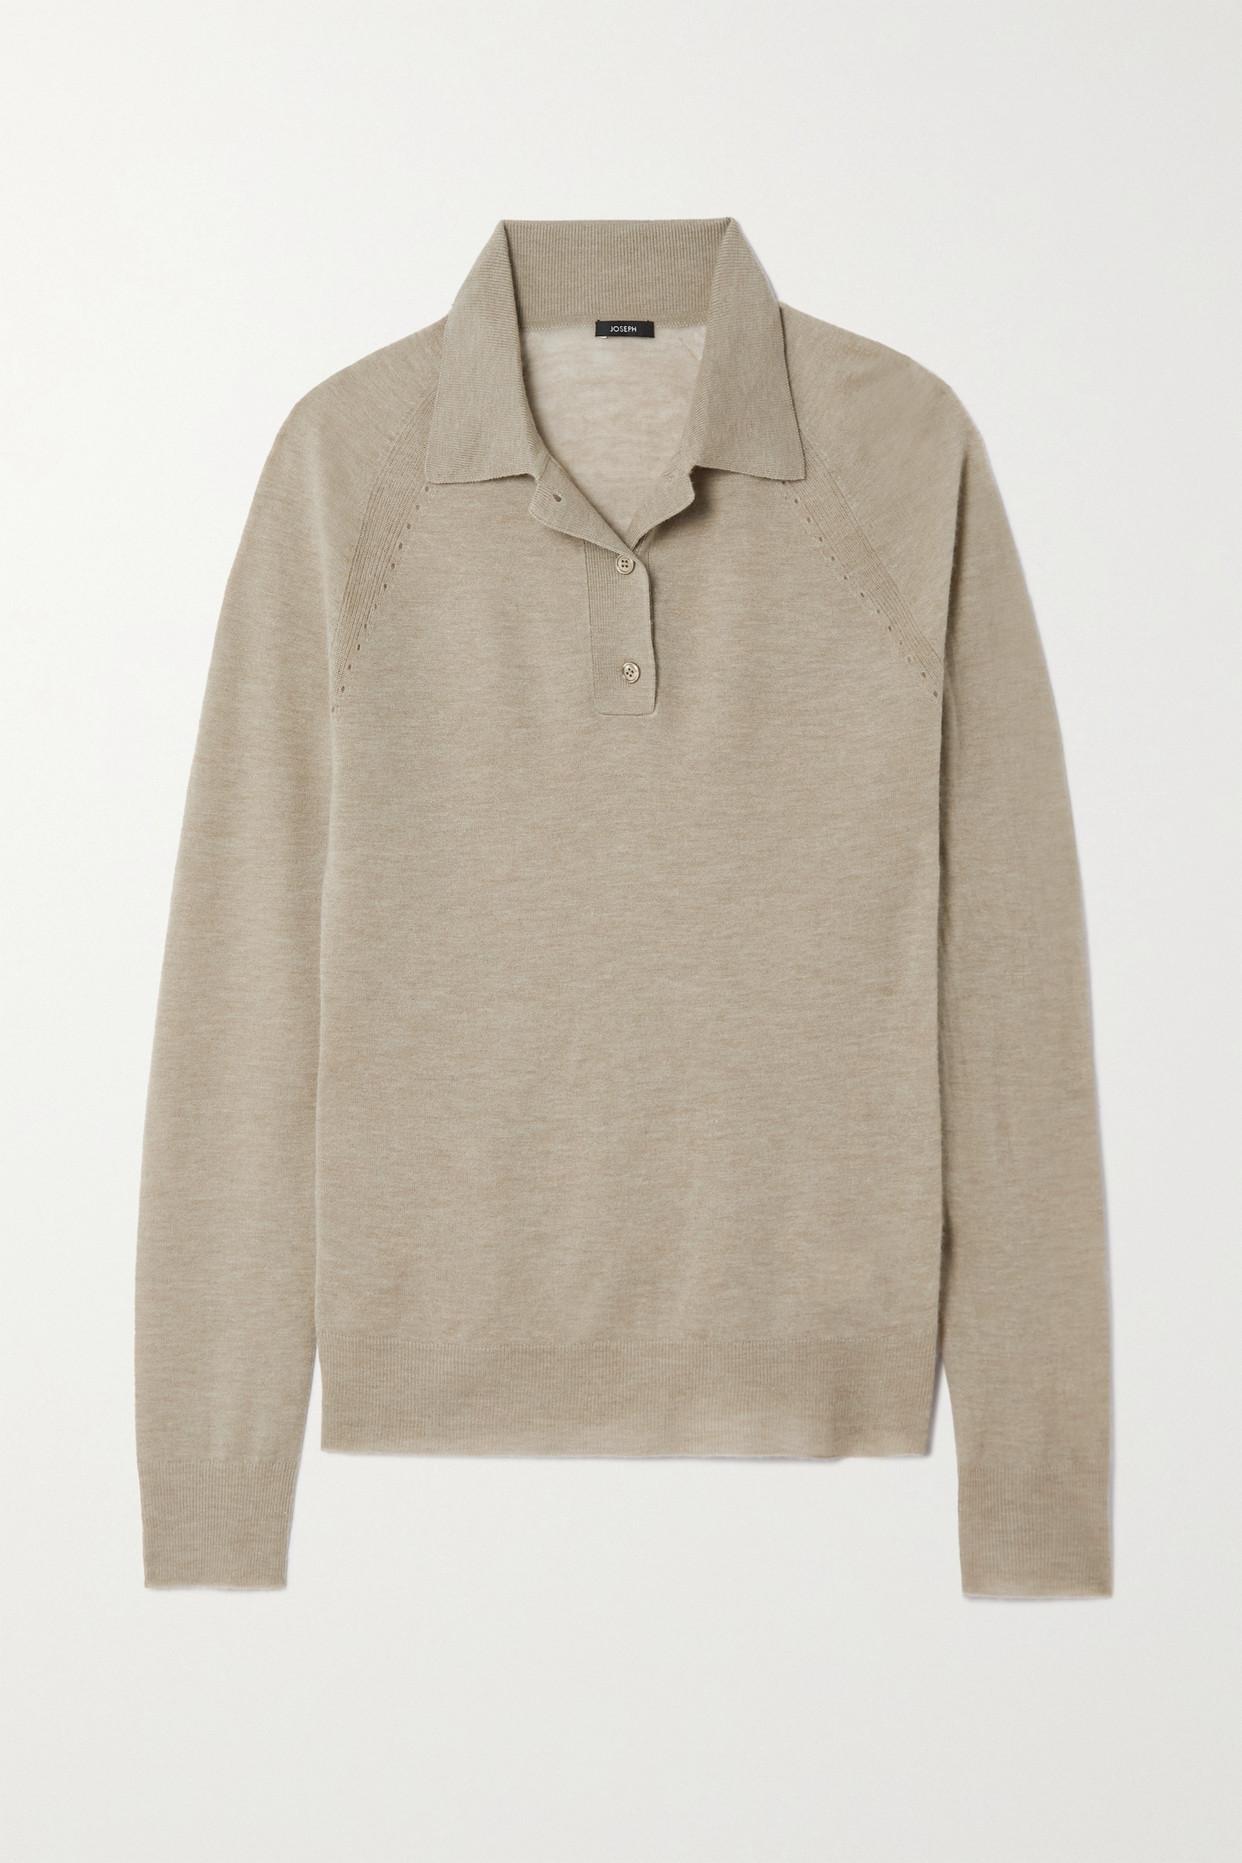 JOSEPH Cashair Cashmere Polo Sweater in Natural | Lyst